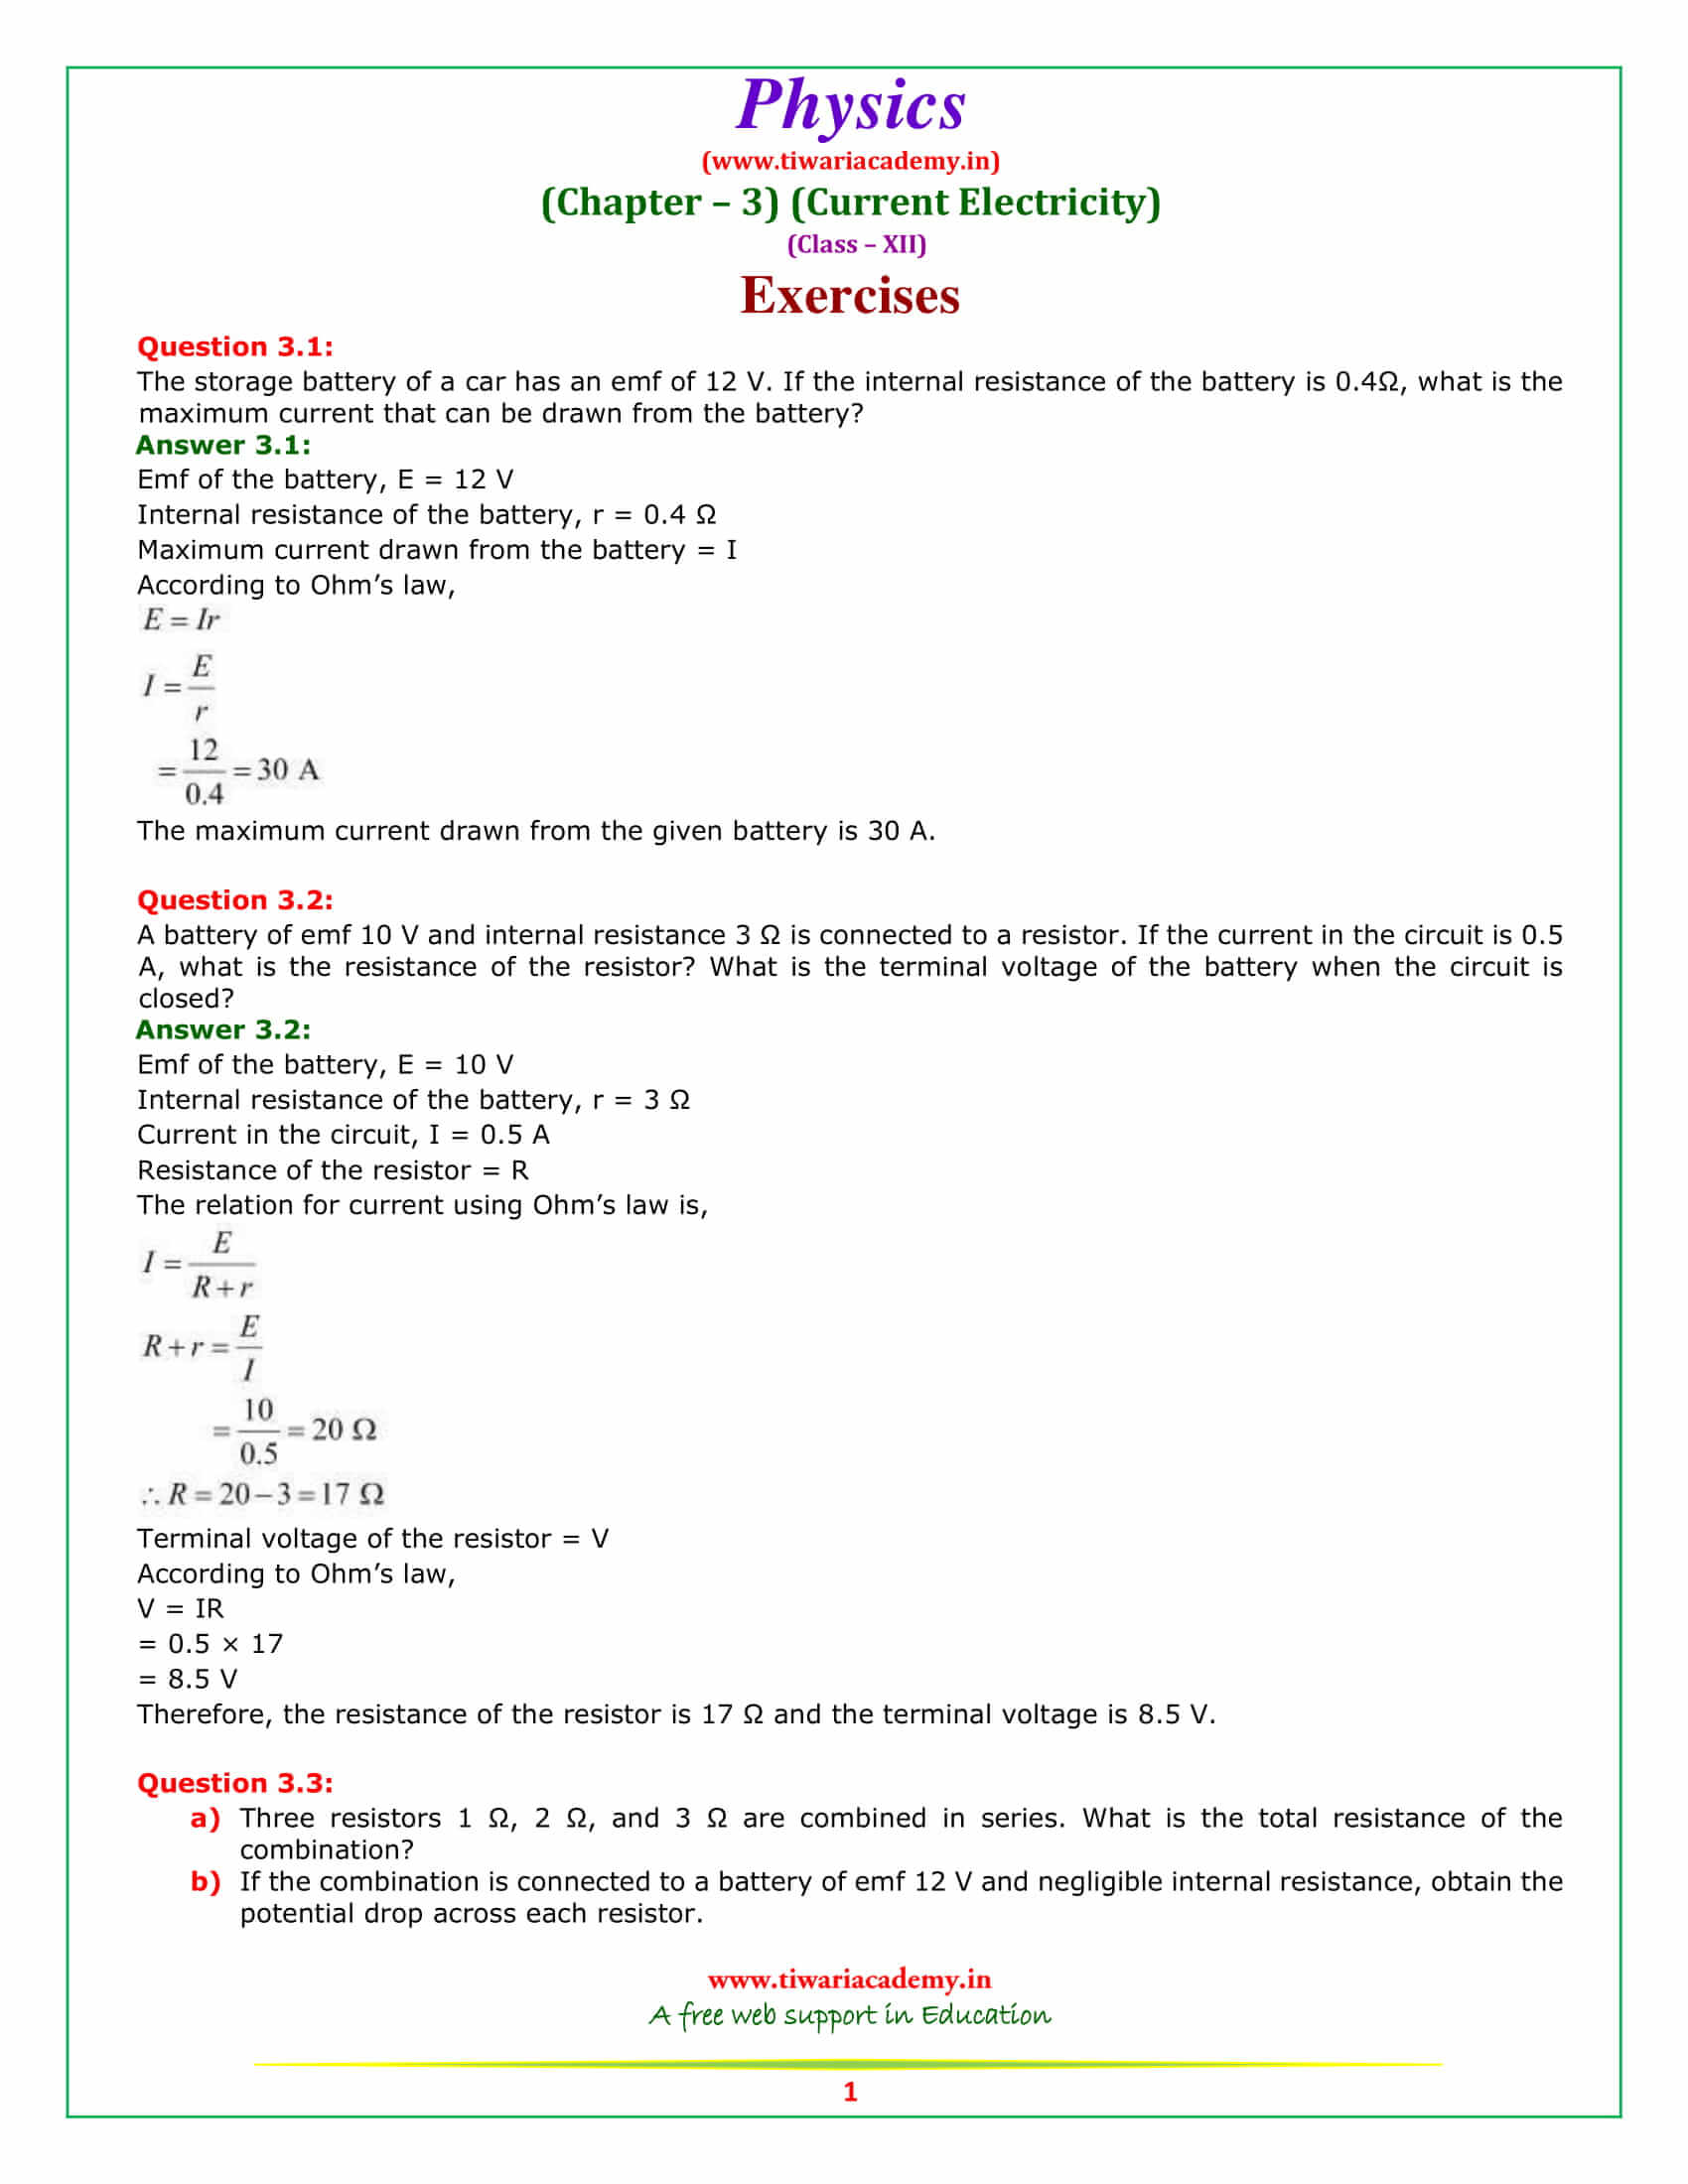 NCERT Solutions for Class 12 Physics Chapter 3 Current Electricity question answrs